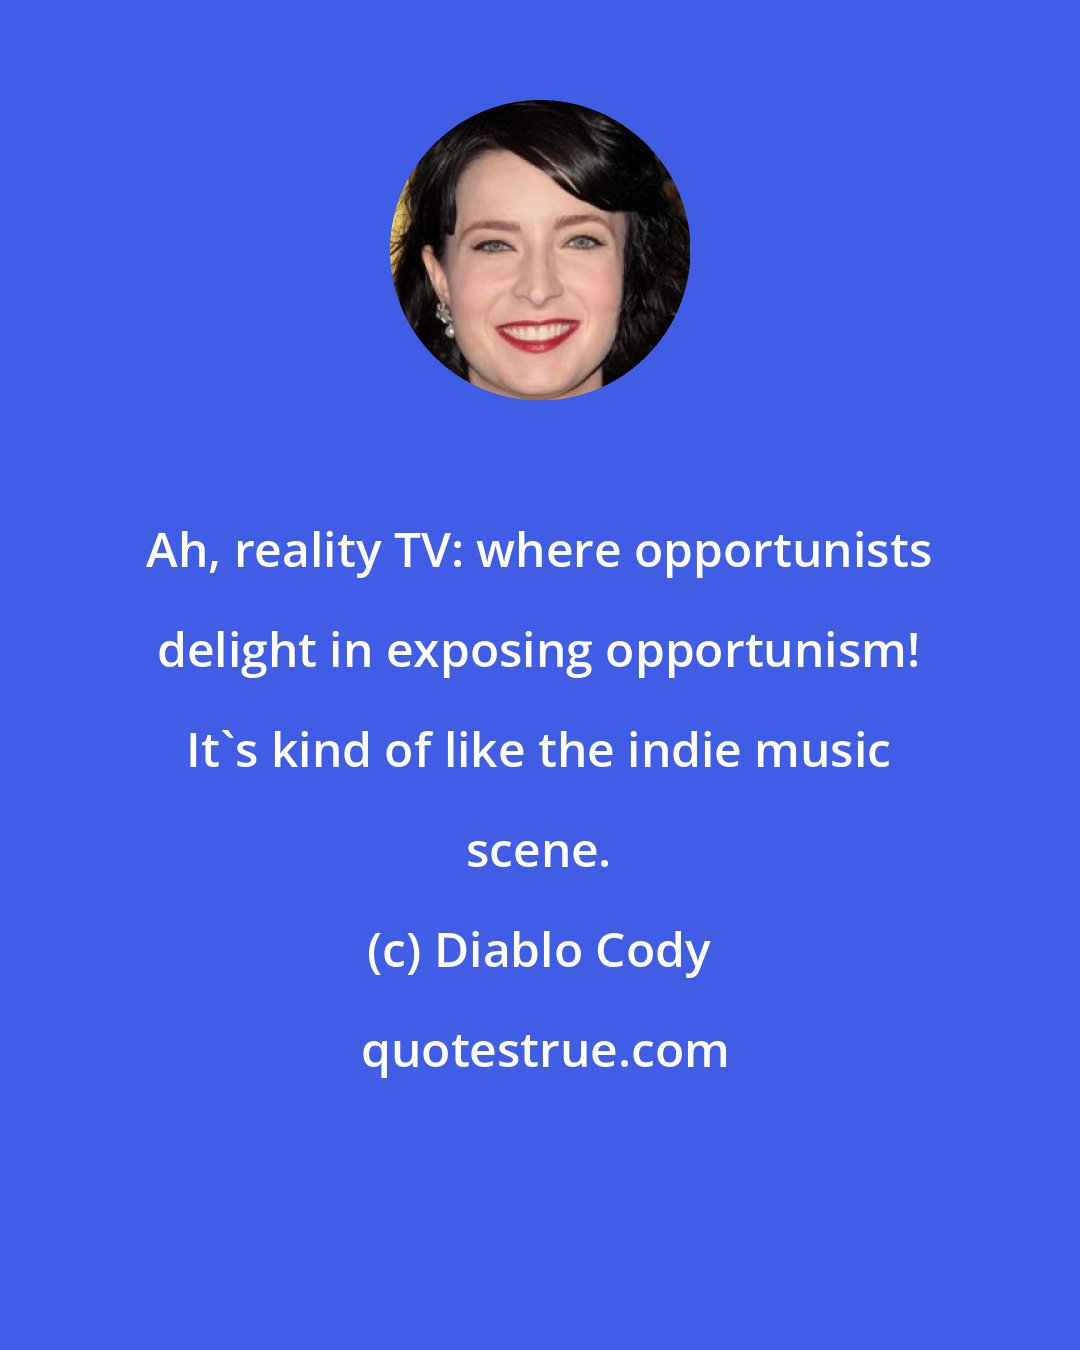 Diablo Cody: Ah, reality TV: where opportunists delight in exposing opportunism! It's kind of like the indie music scene.